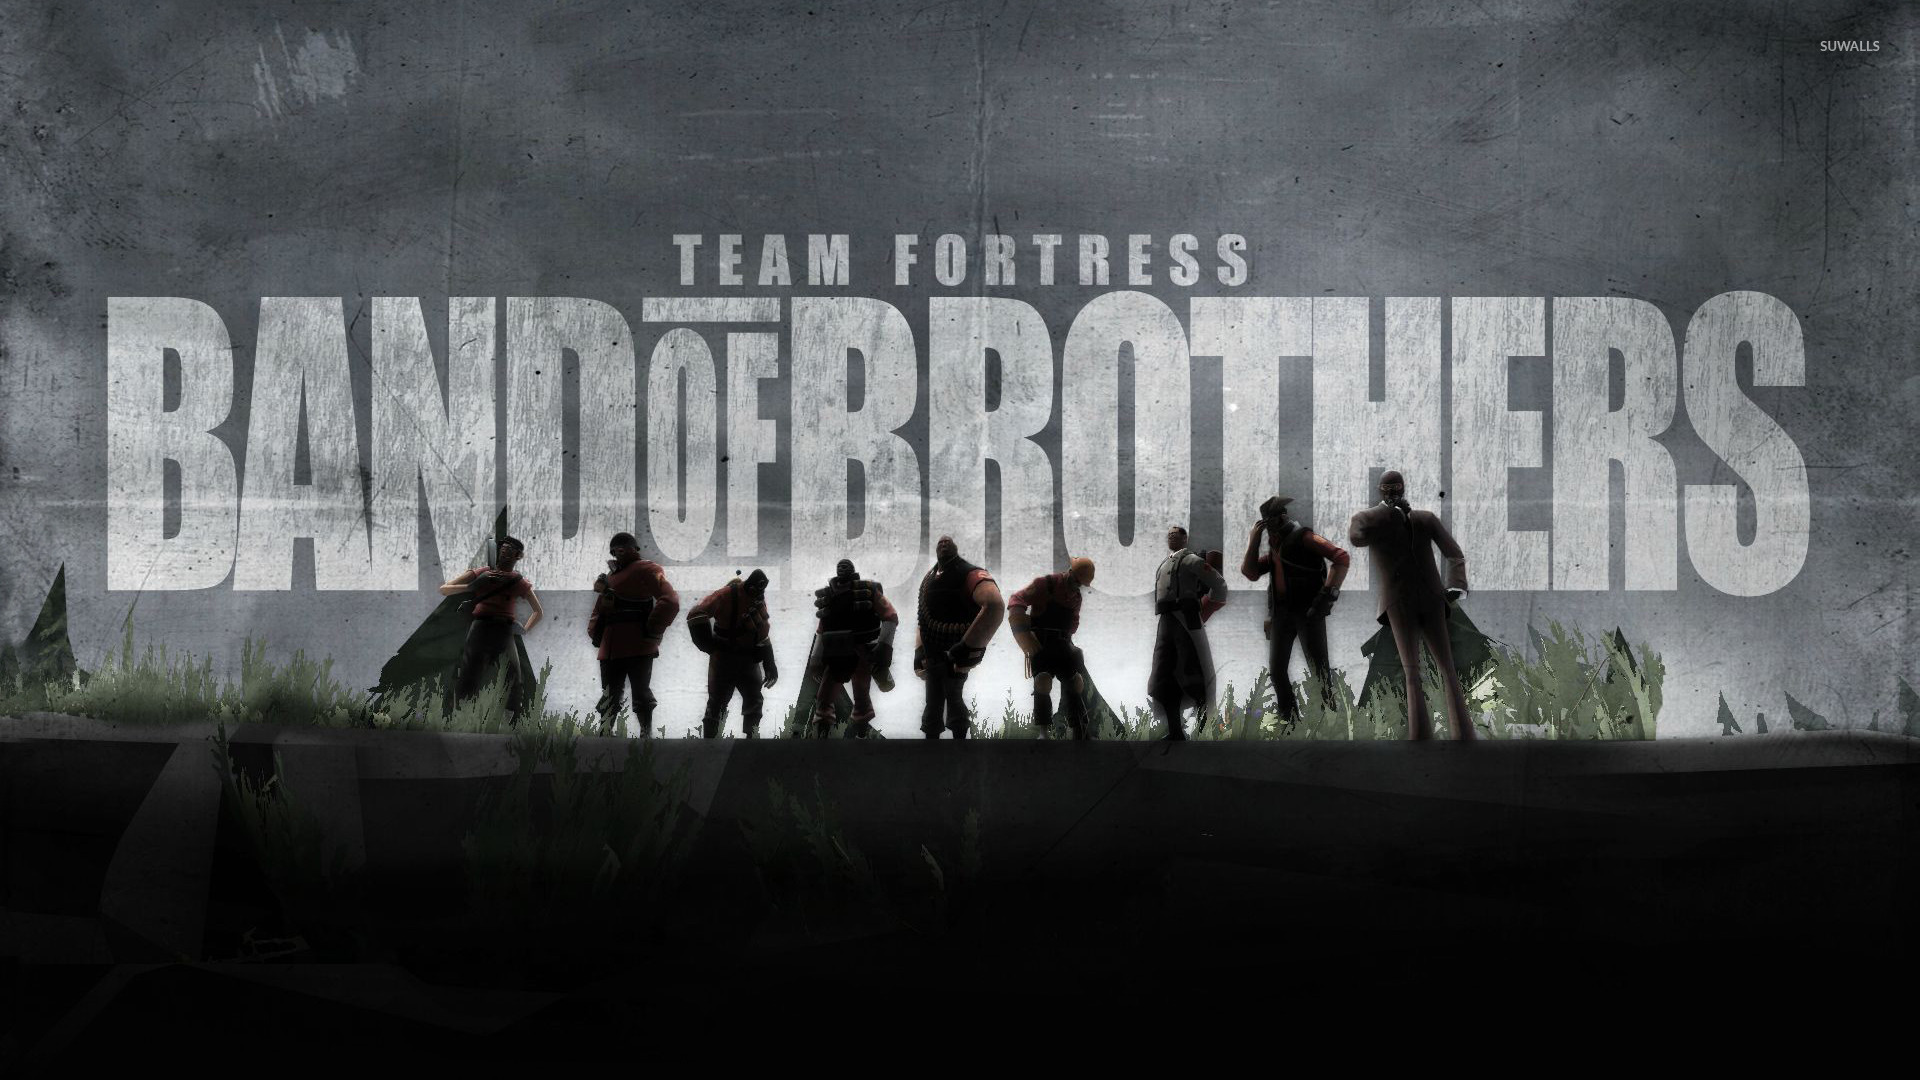 Team Fortress Band Of Brothers Wallpaper Game